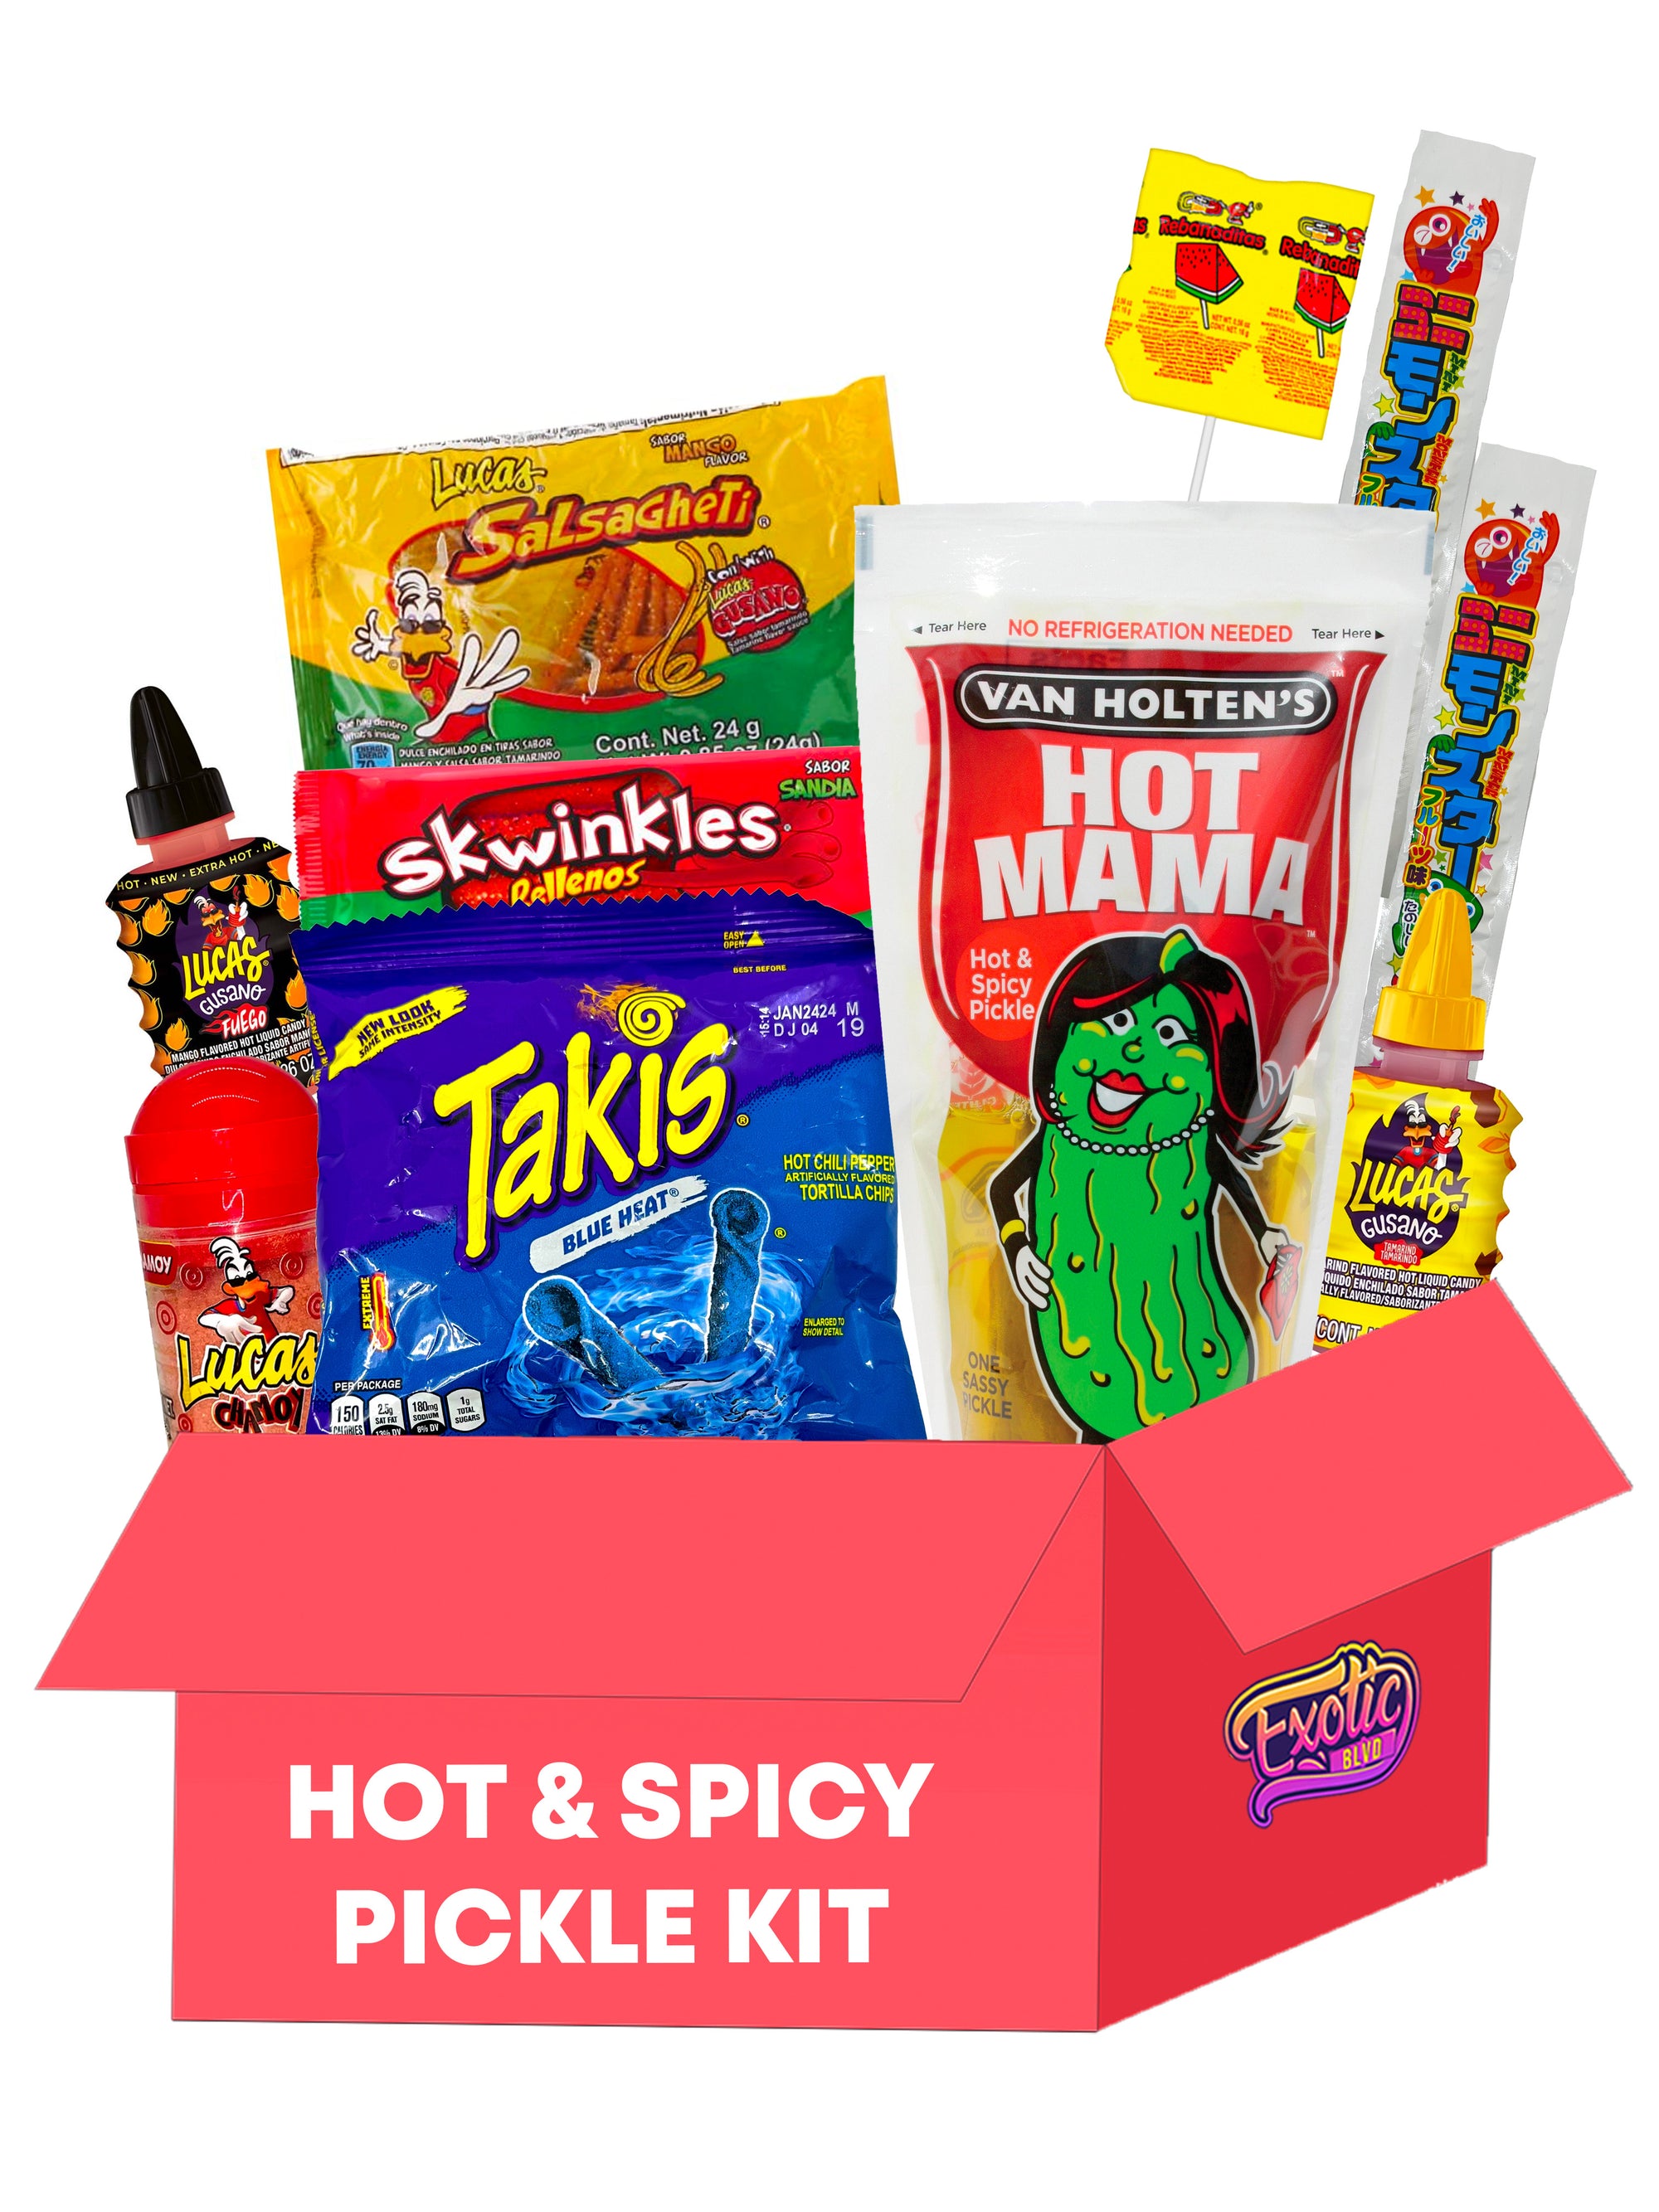 Hot & Spicy Pickle Kit